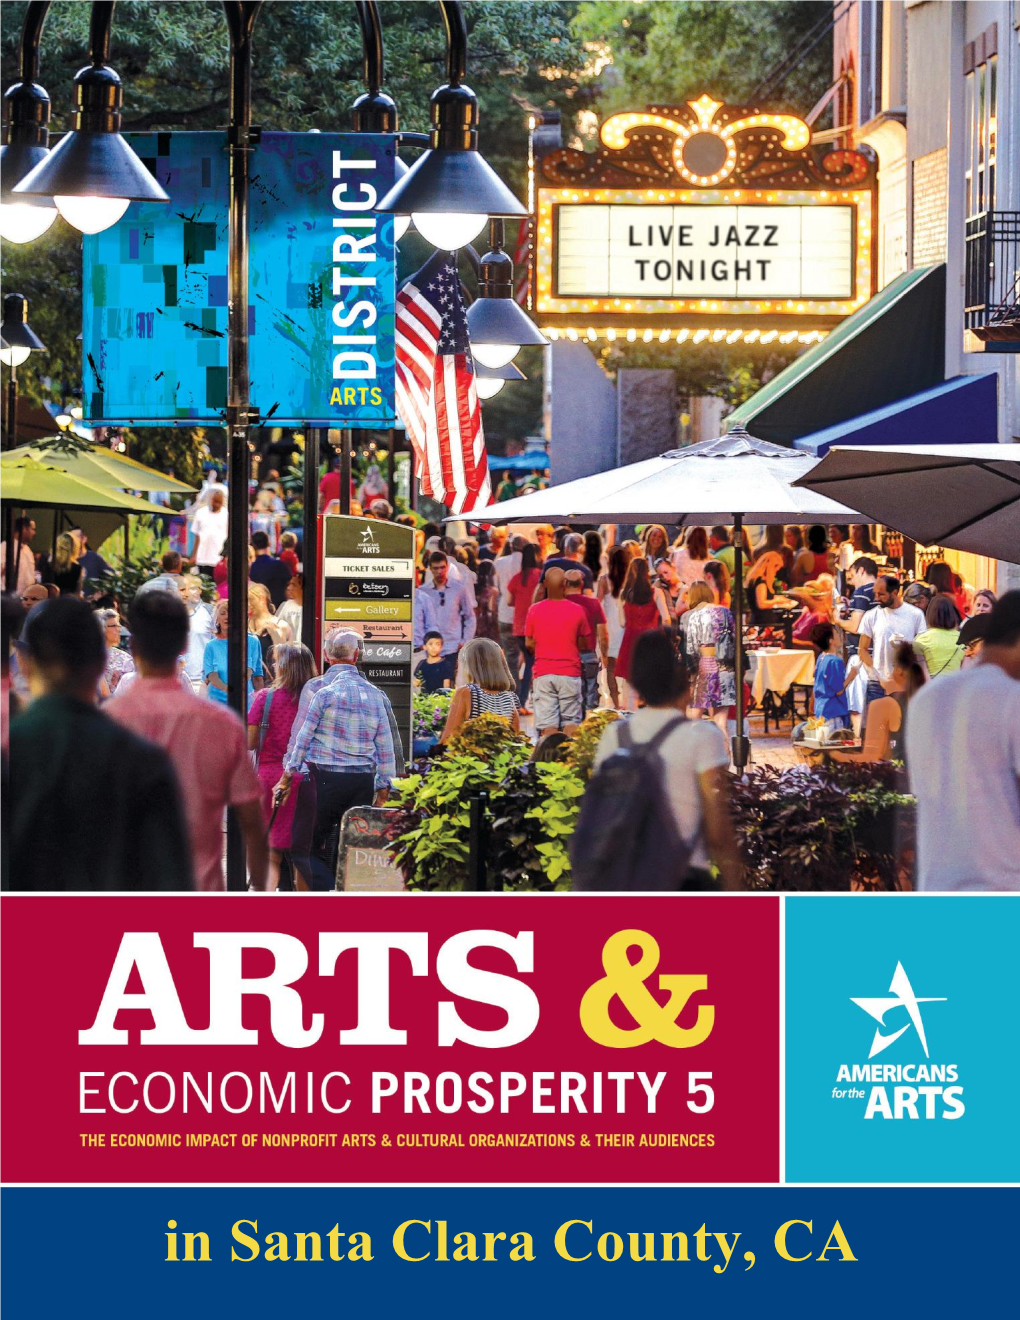 Santa Clara County, CA Arts and Economic Prosperity® 5 Was Conducted by Americans for the Arts, the Nation’S Nonprofit Organization for Advancing the Arts in America